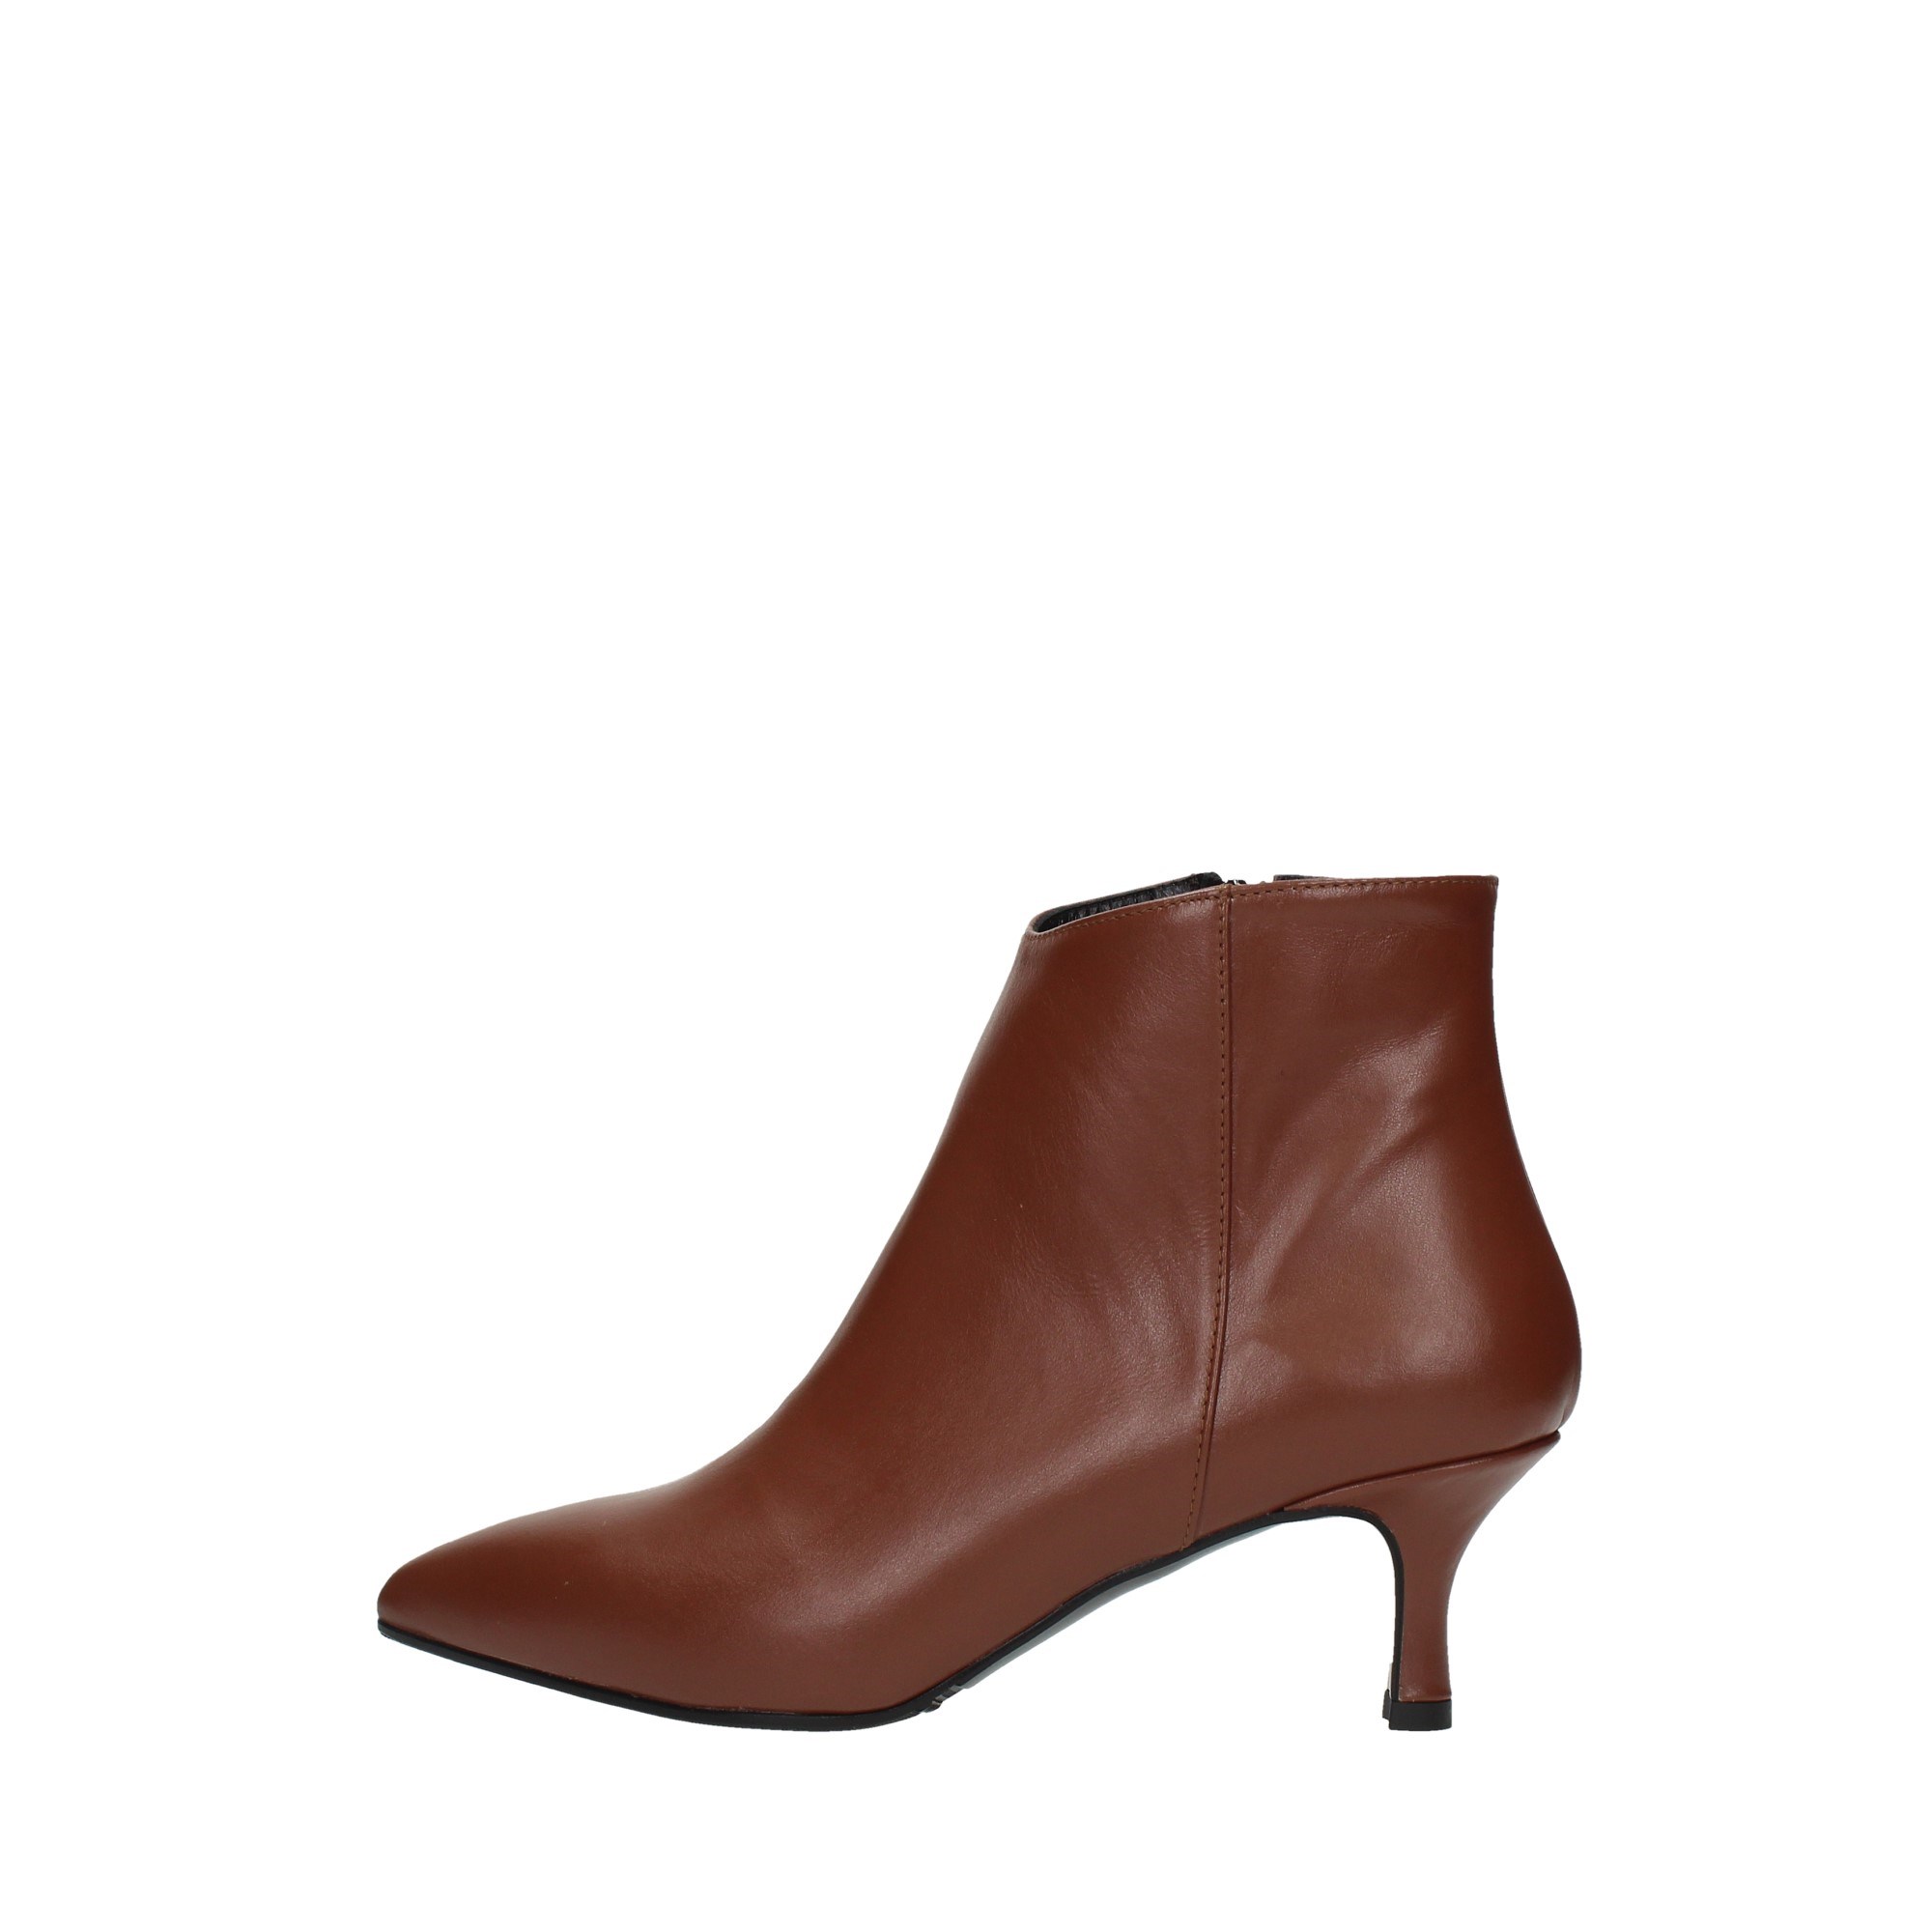 Andrea Pinto Shoes Women Booties 528